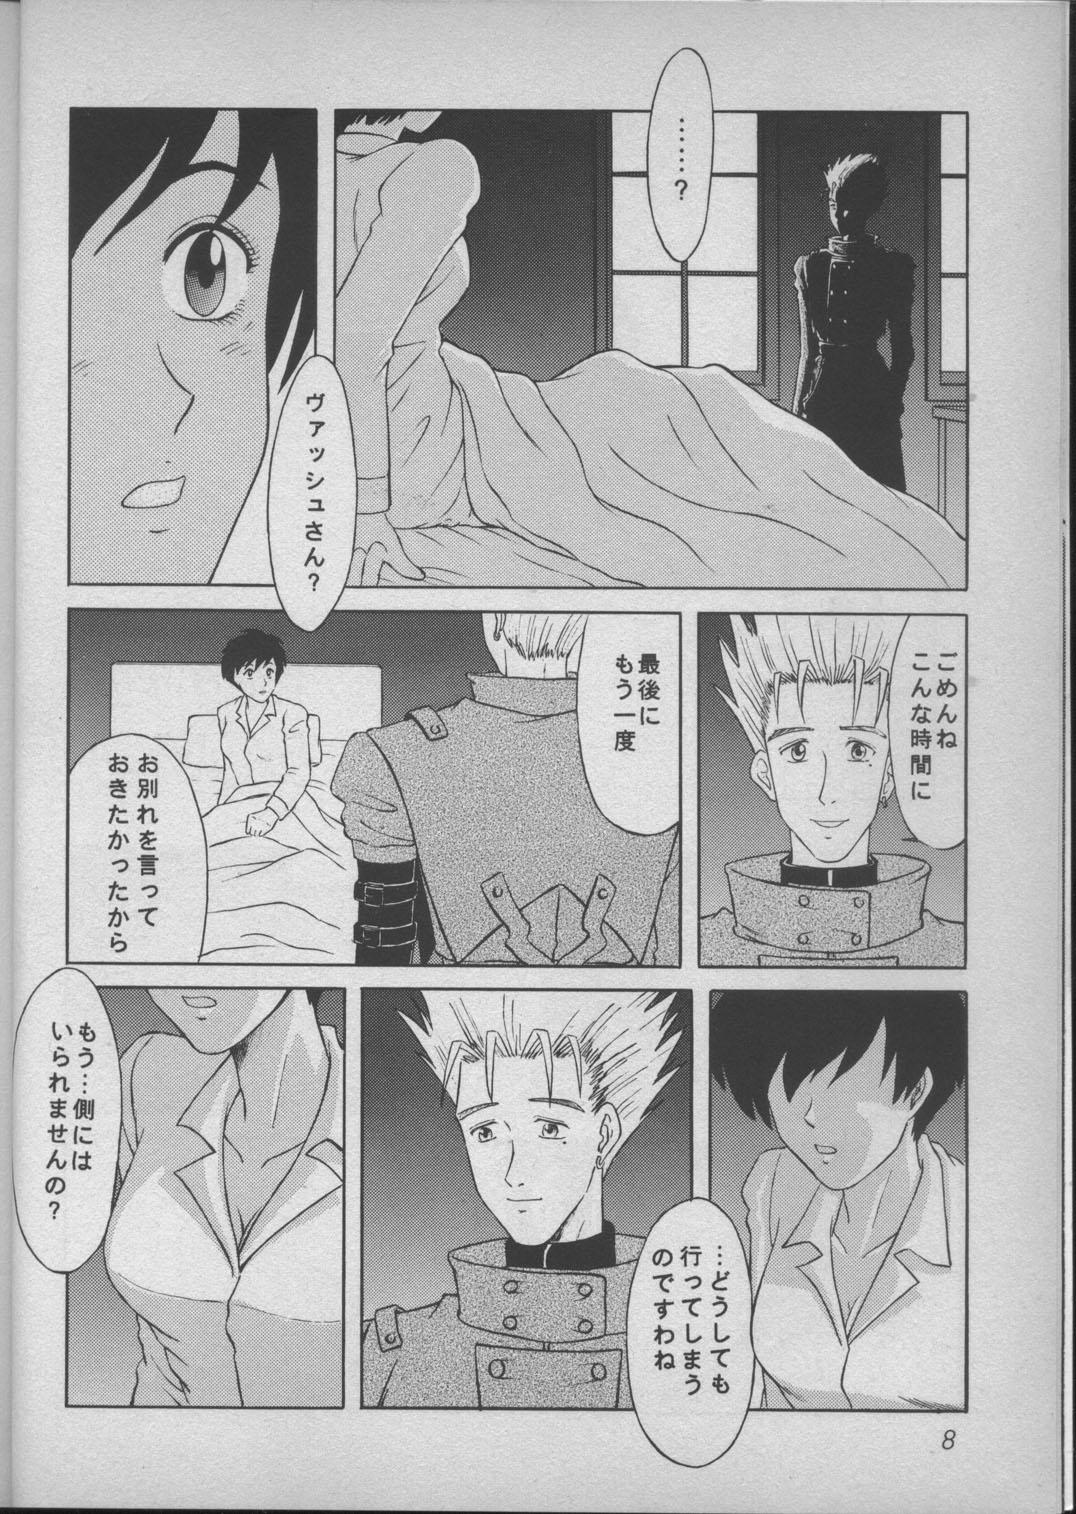 Stepbrother DREAM LOVERS - Trigun Uncut - Page 7